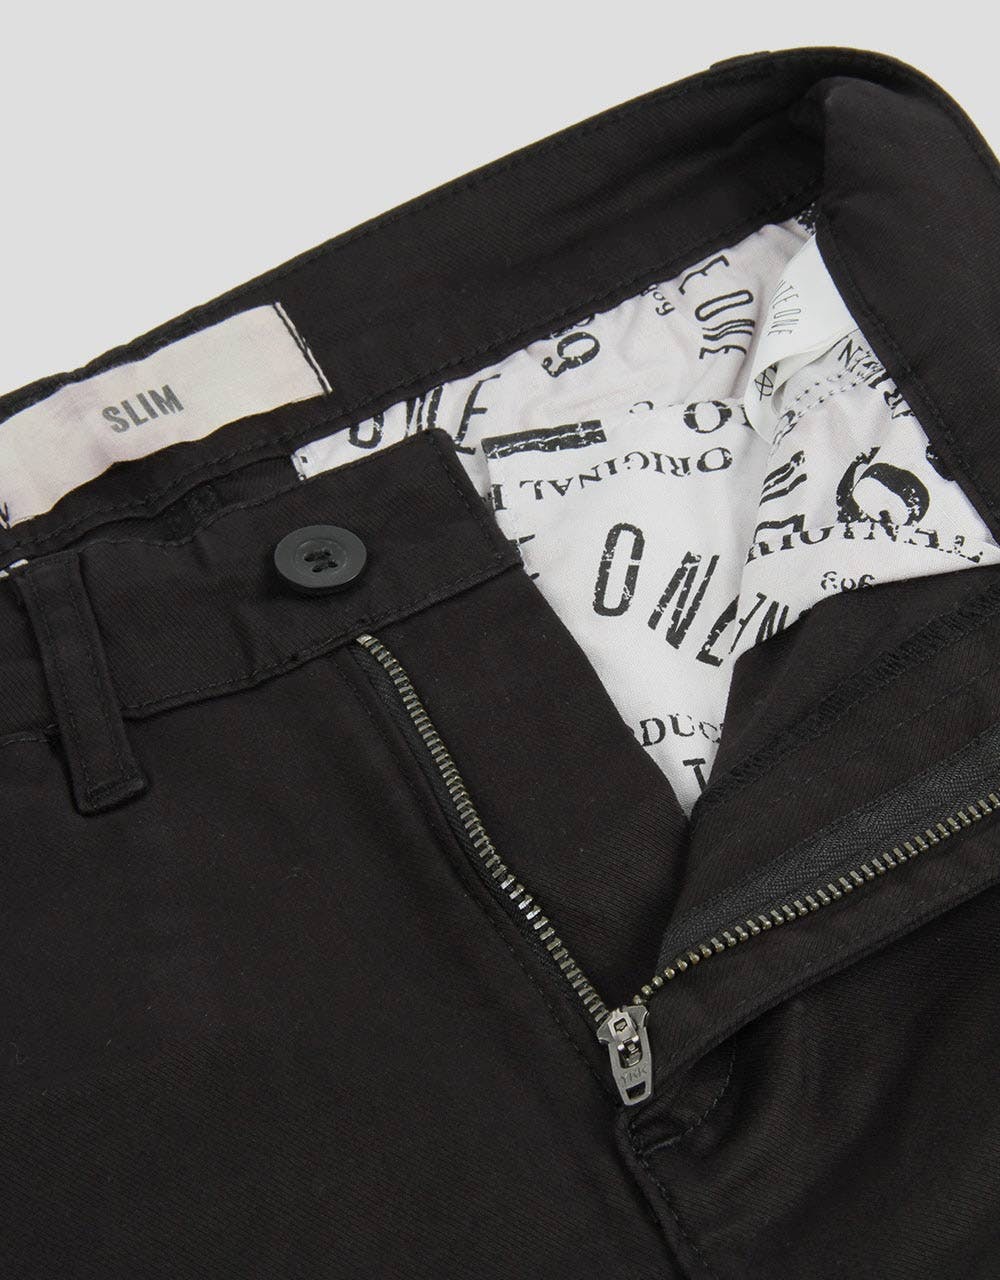 Route One Slim Fit Kids Chinos - Black